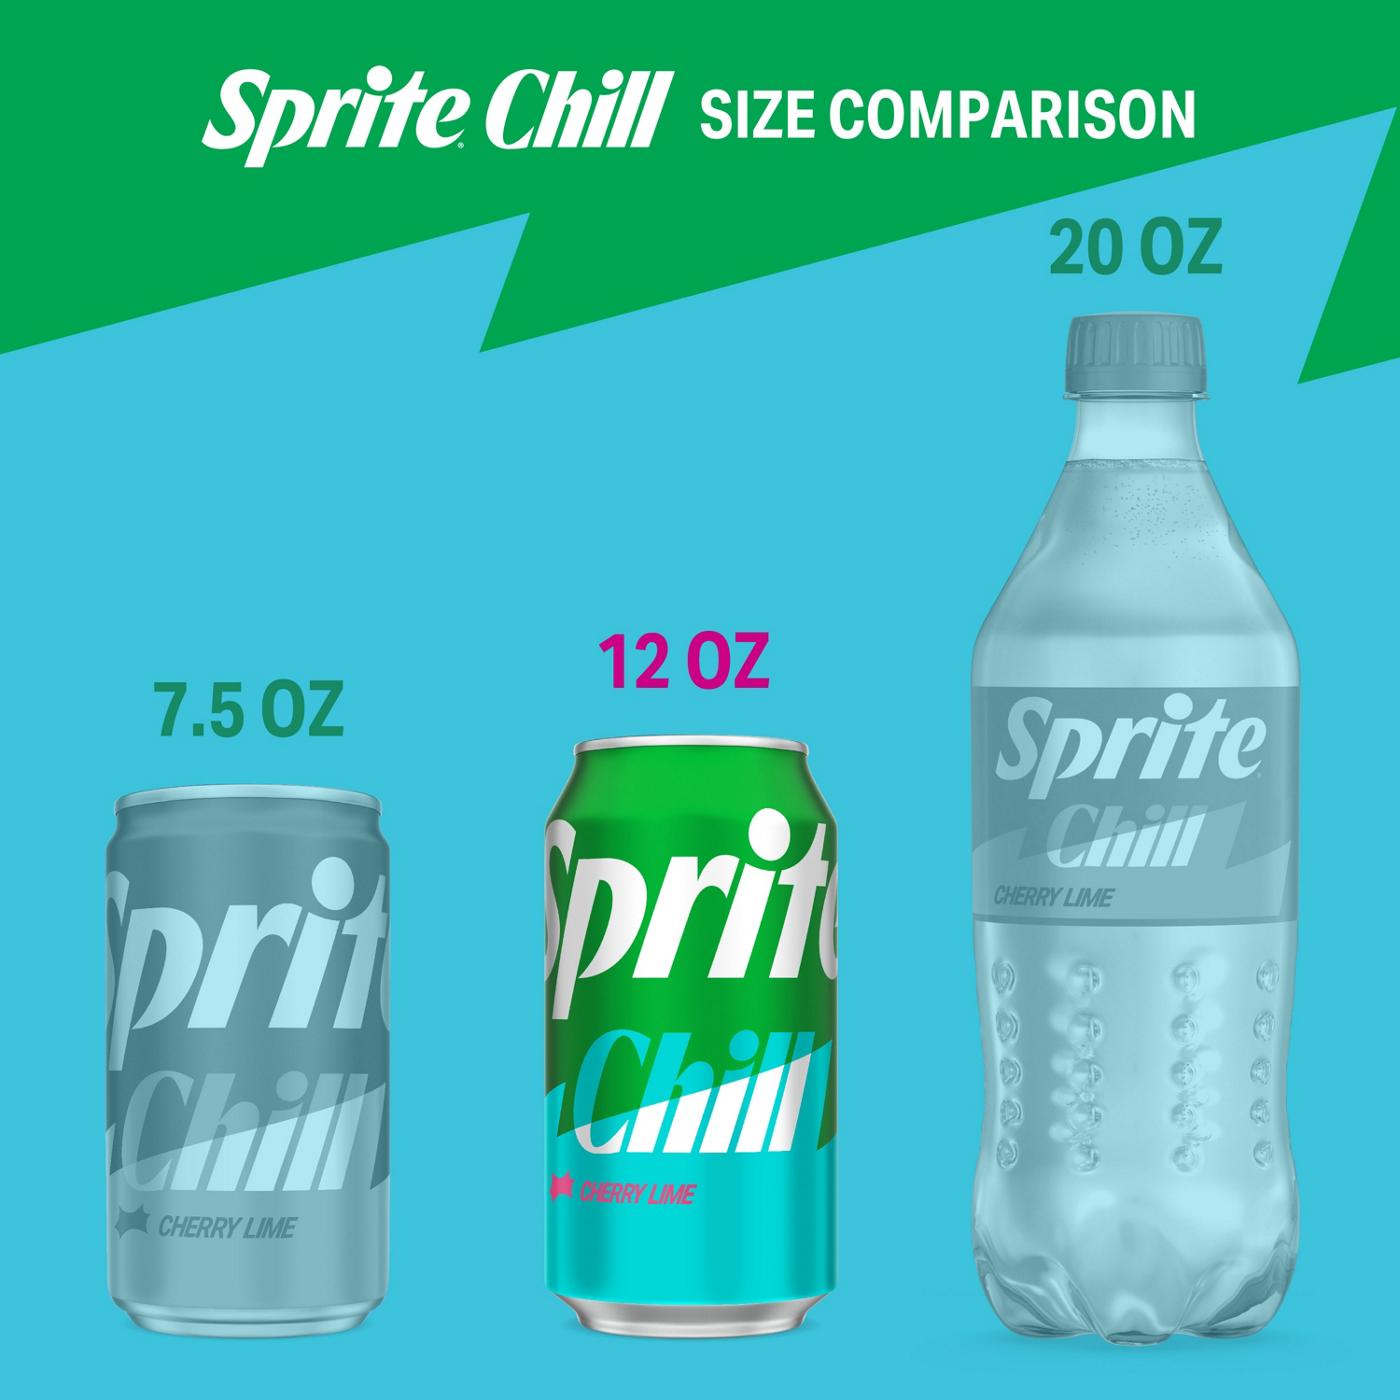 Sprite Chill Cherry Lime, 12 pk Cans; image 6 of 7